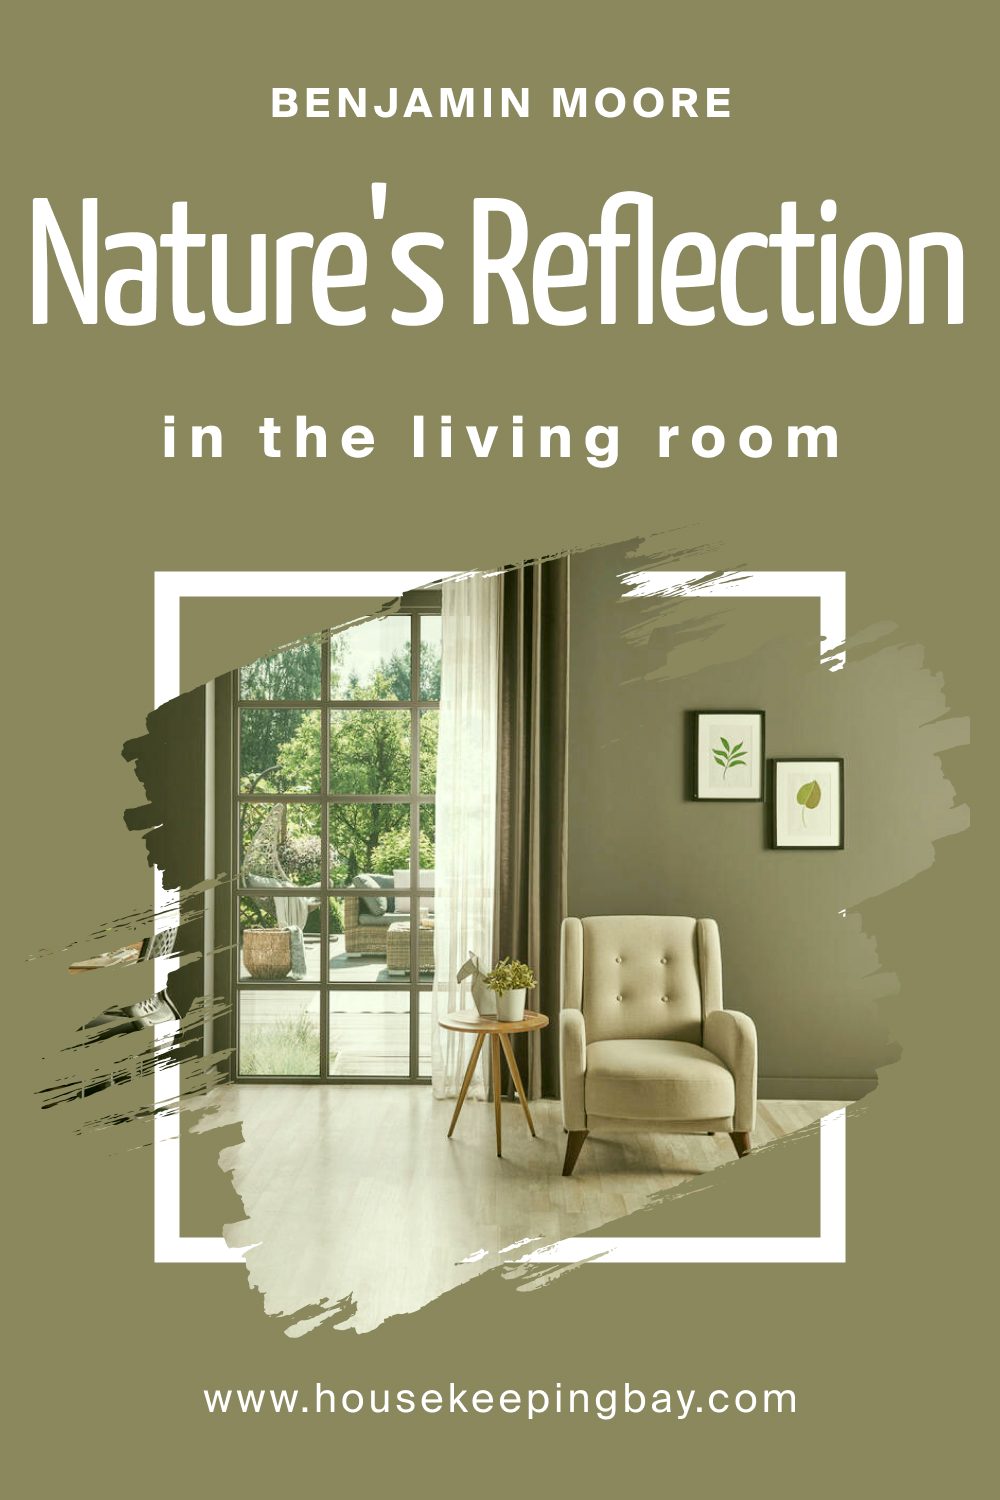 How to Use BM Nature's Reflection 504 in the Living Room?